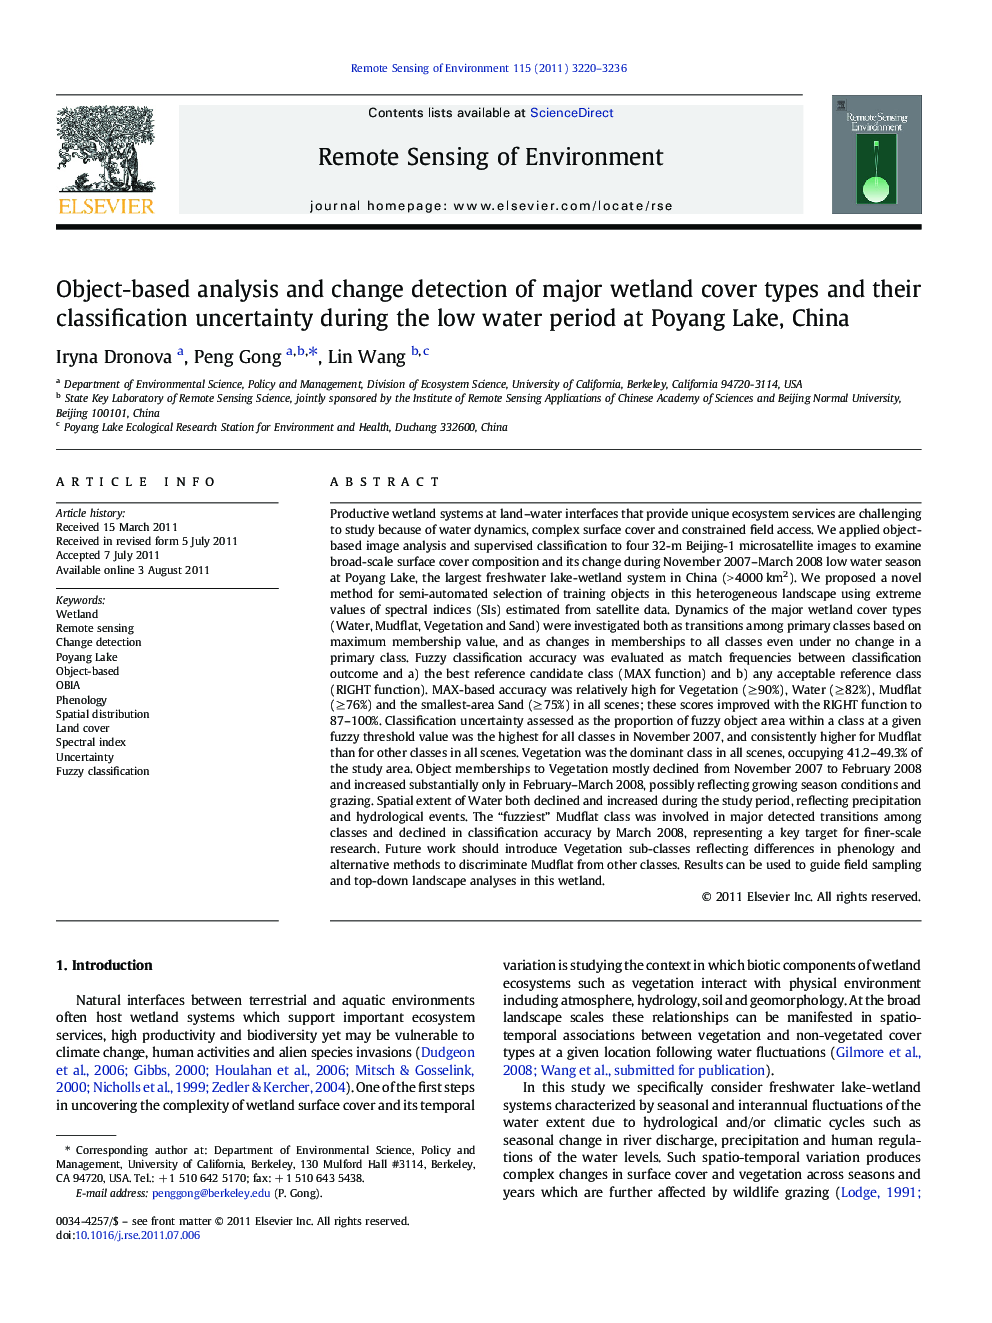 Object-based analysis and change detection of major wetland cover types and their classification uncertainty during the low water period at Poyang Lake, China